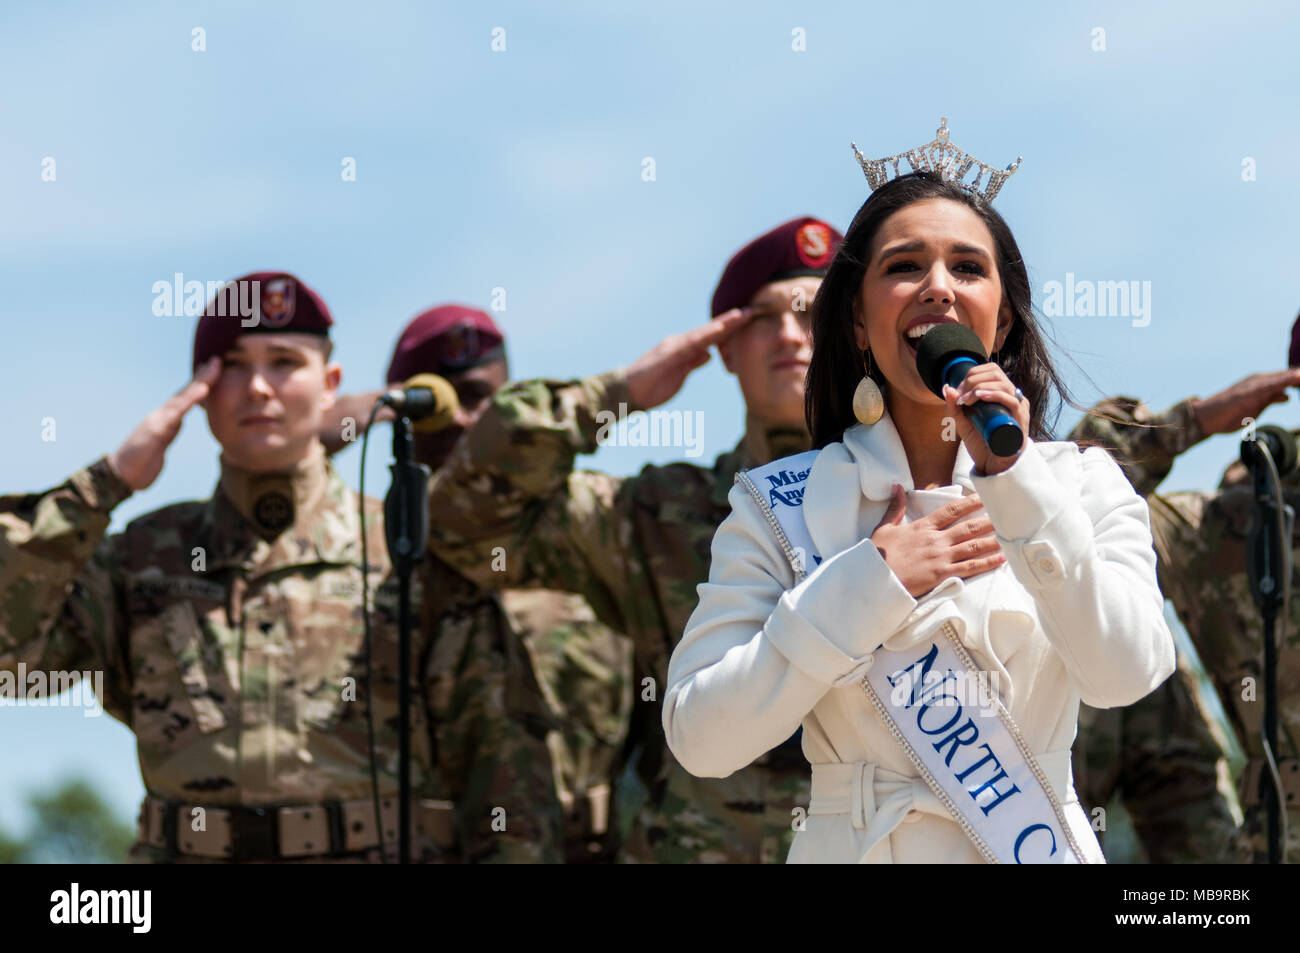 Pinehurst, North Carolina, USA. 8th Apr, 2018. April 8, 2018 - Pinehurst, N.C., USA - Miss North Carolina Victoria Huggins, sings the national anthem in front of the 82nd Airborne Division All American Chorus at the 69th annual Spring Matinee Harness races sponsored by the Pinehurst Driving & Training Club, at the Pinehurst Harness Track, Pinehurst, N.C. The Pinehurst Harness Track is a 111-acre equestrian facility that has been a winter training center for standardbred horses since 1915. This year's races commemorate the 103rd anniversary of the track. (Credit Image: © Timothy L. Hale via Z Stock Photo